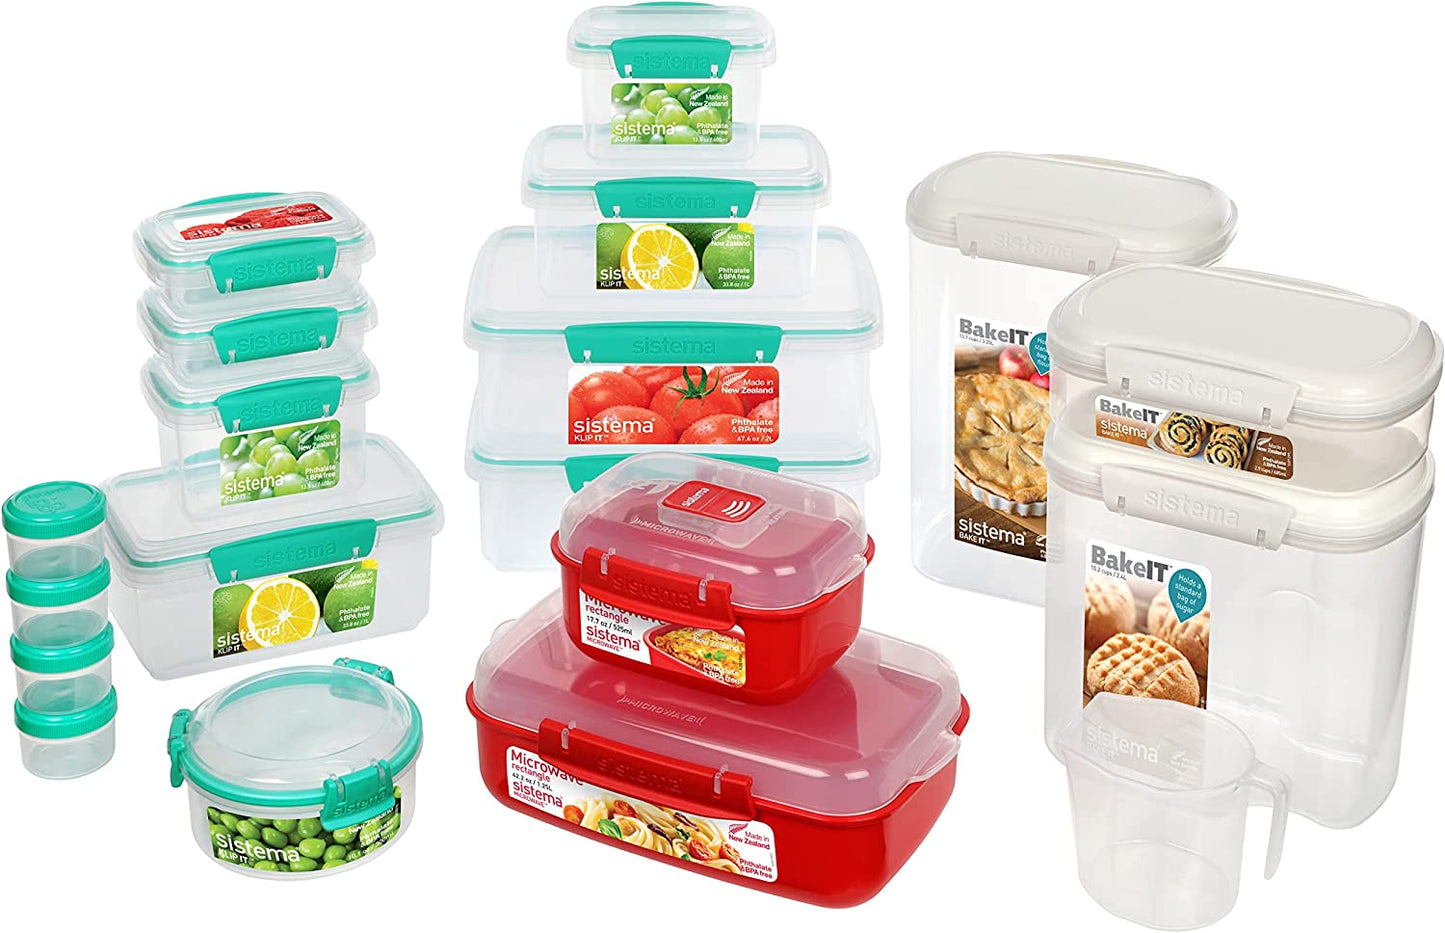 New Home Kitchen Storage & Organisation Gift Pack | 18 Food Storage Containers with Lids | Lunch Boxes, Meal Prep Containers, Pantry Storage, Microwave Food Steamers & More | Bpa-Free